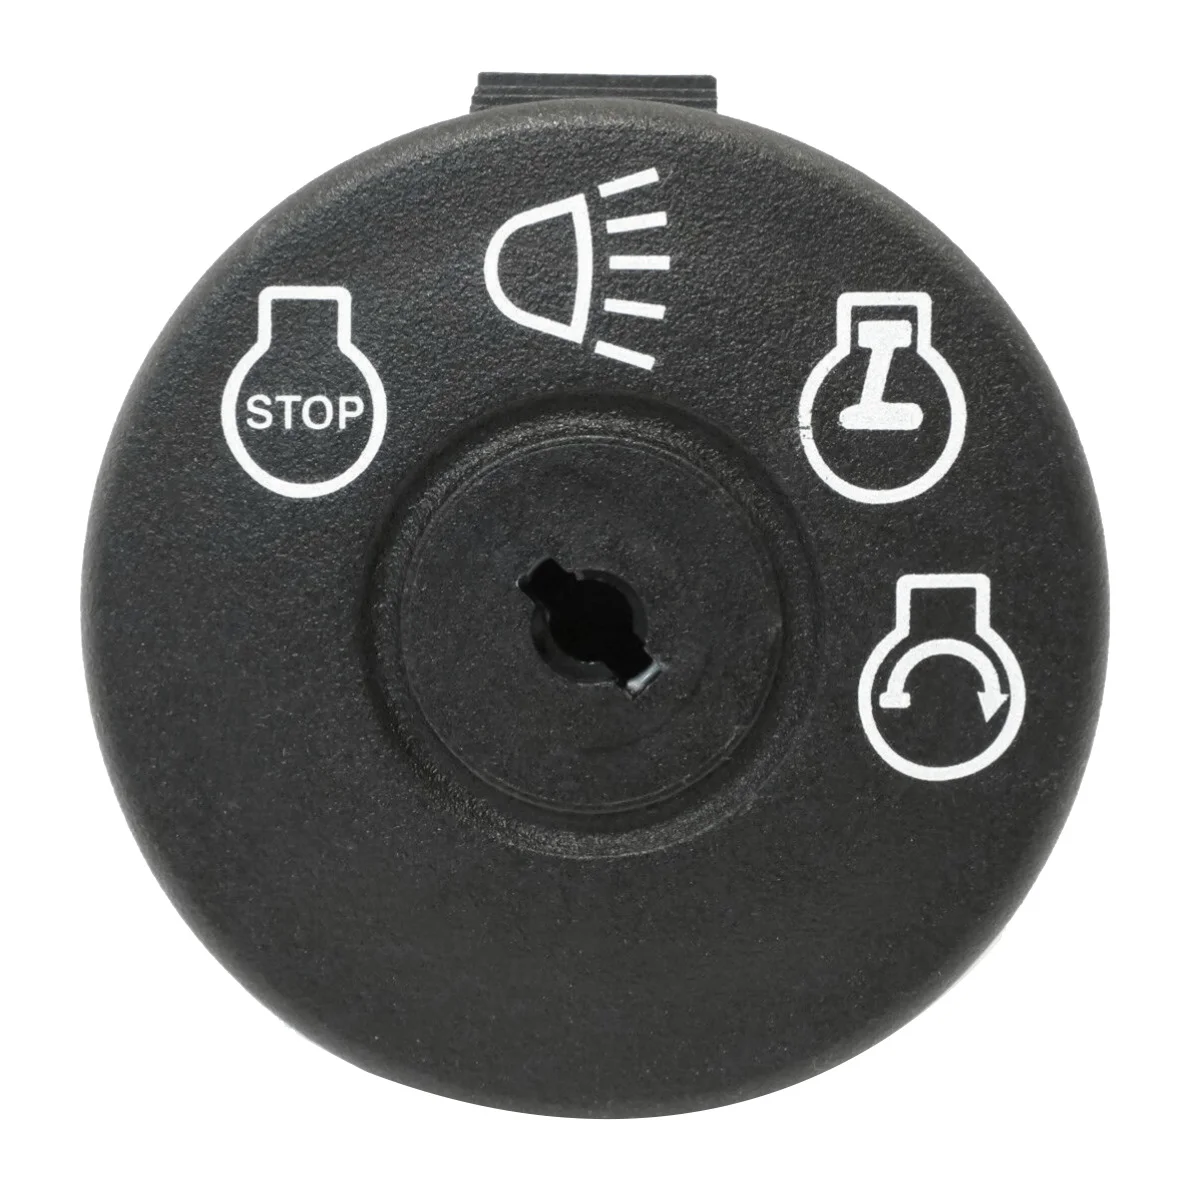 

430-445 Starter Switch Replaces MTD 925-1741 for Murray 94762MA AYP 175566 175442 John Deere GY20074 Husqvarna 532 17